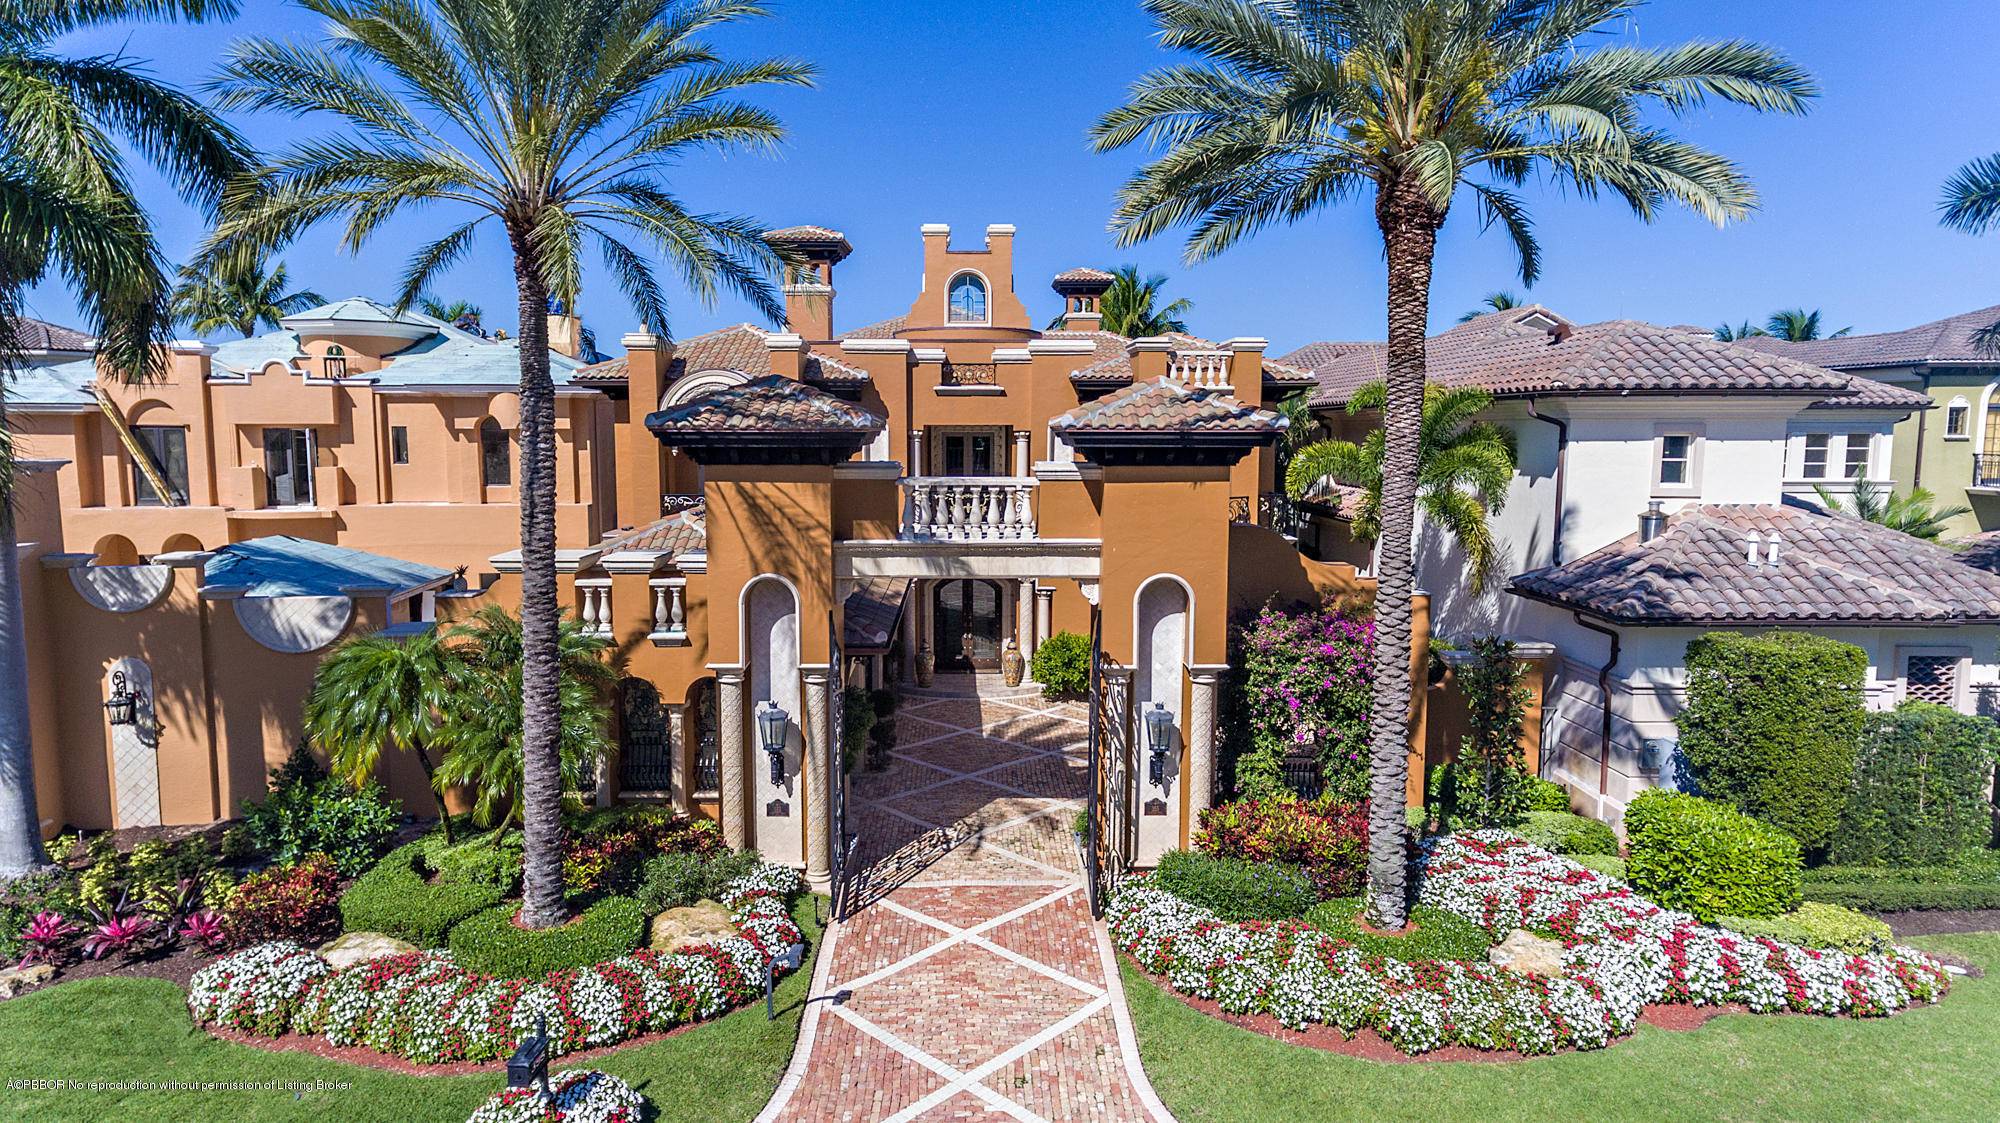 Rare opportunity to own in the ultra exclusive ''Mizner Lake Estates'' located on the grounds of the prestigious Boca Raton Resort and Club, A Waldorf Astoria Resort.